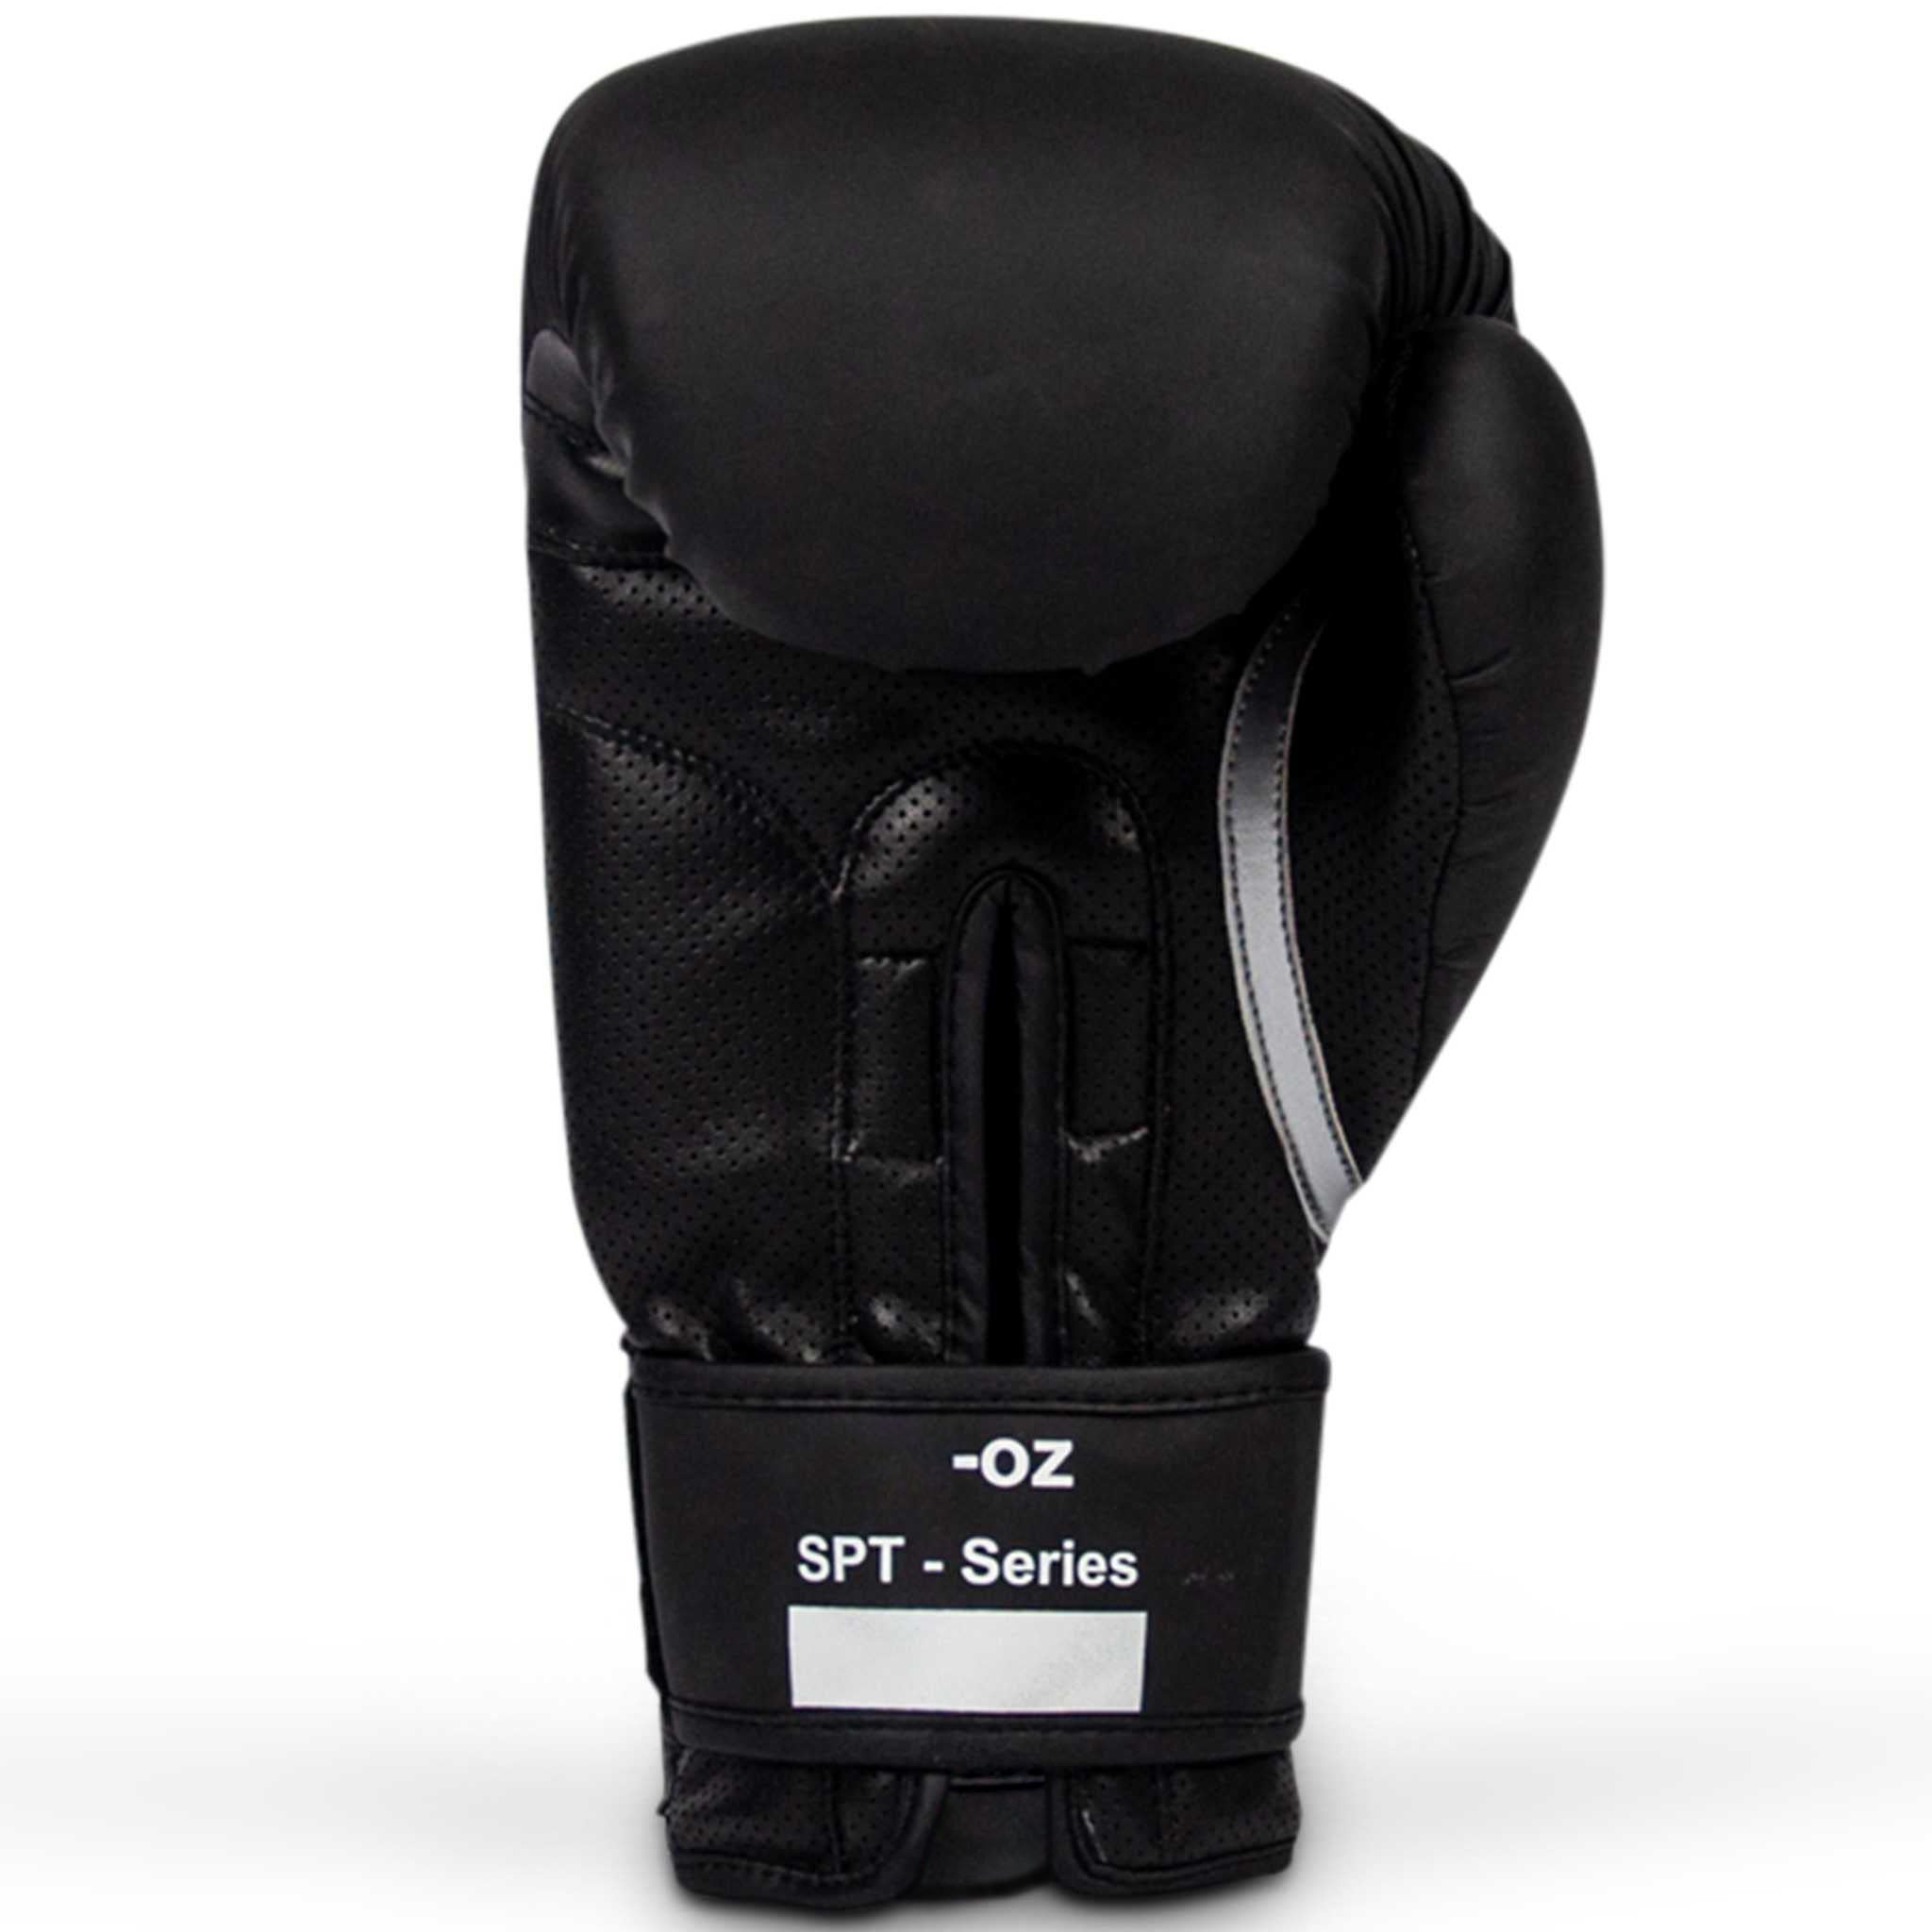 IBF Blackout Series Black Boxing Gloves, All Sizes Available